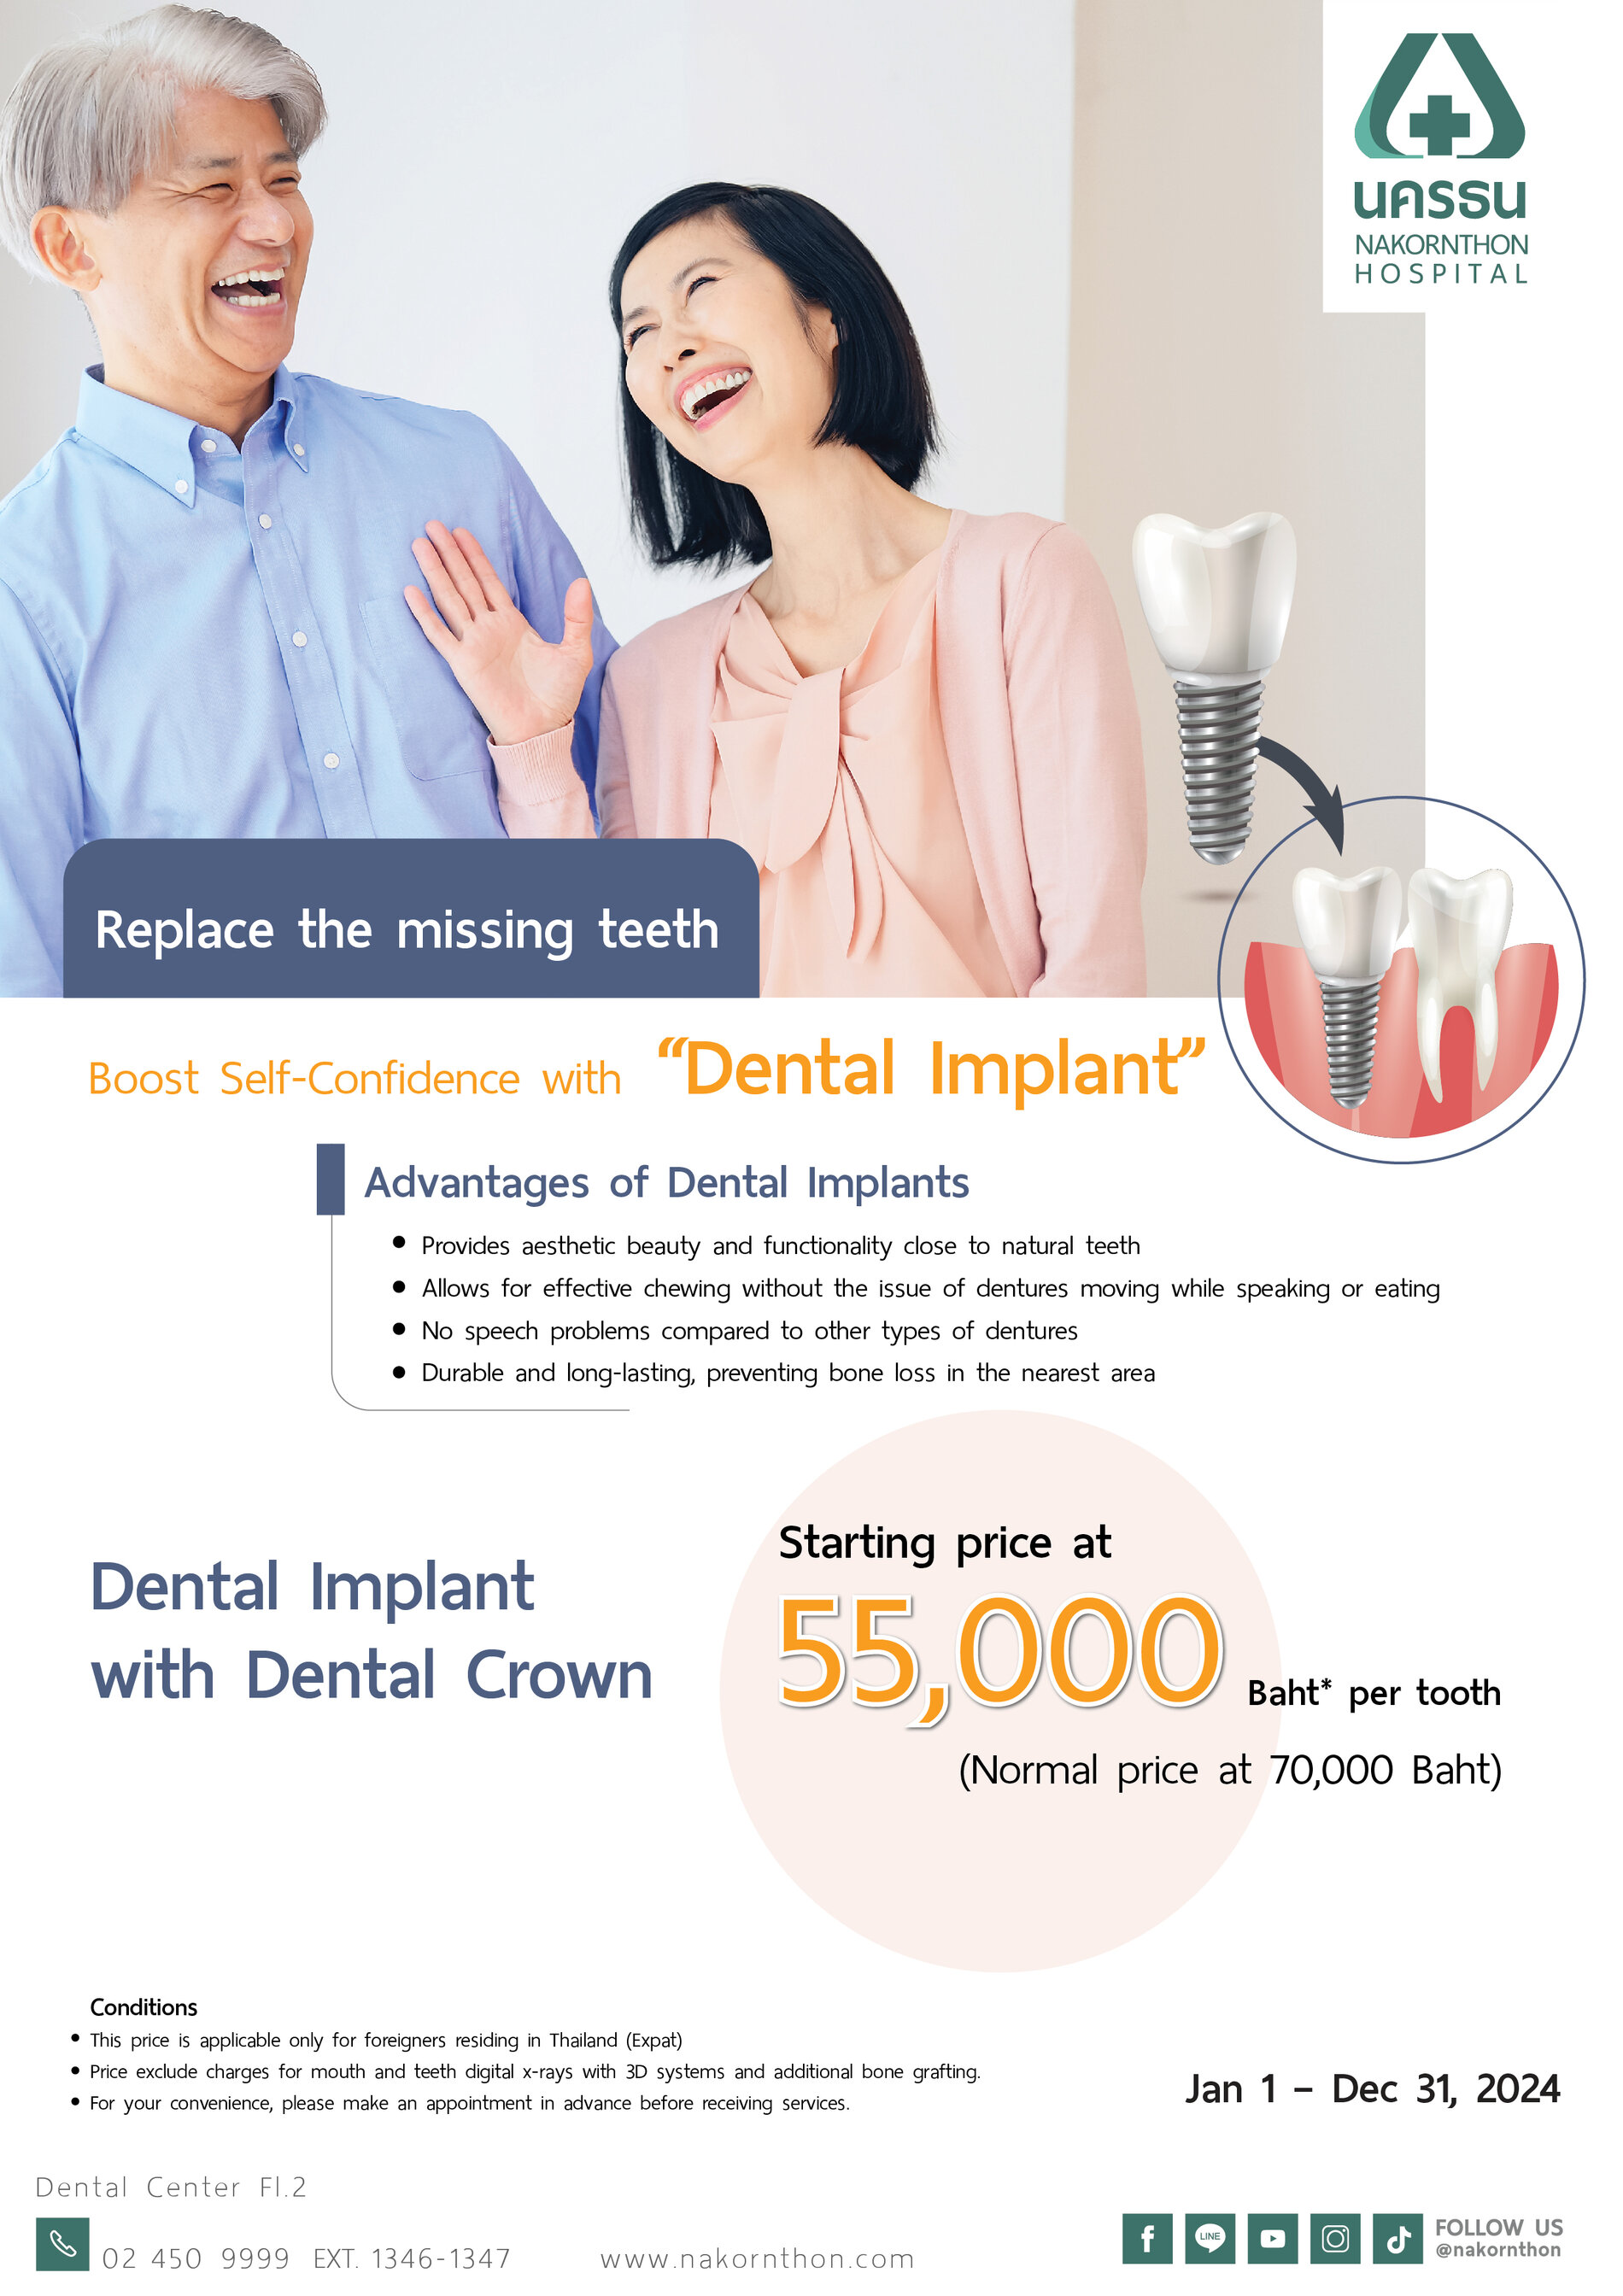 Dental Implant - Replace the missing teeth